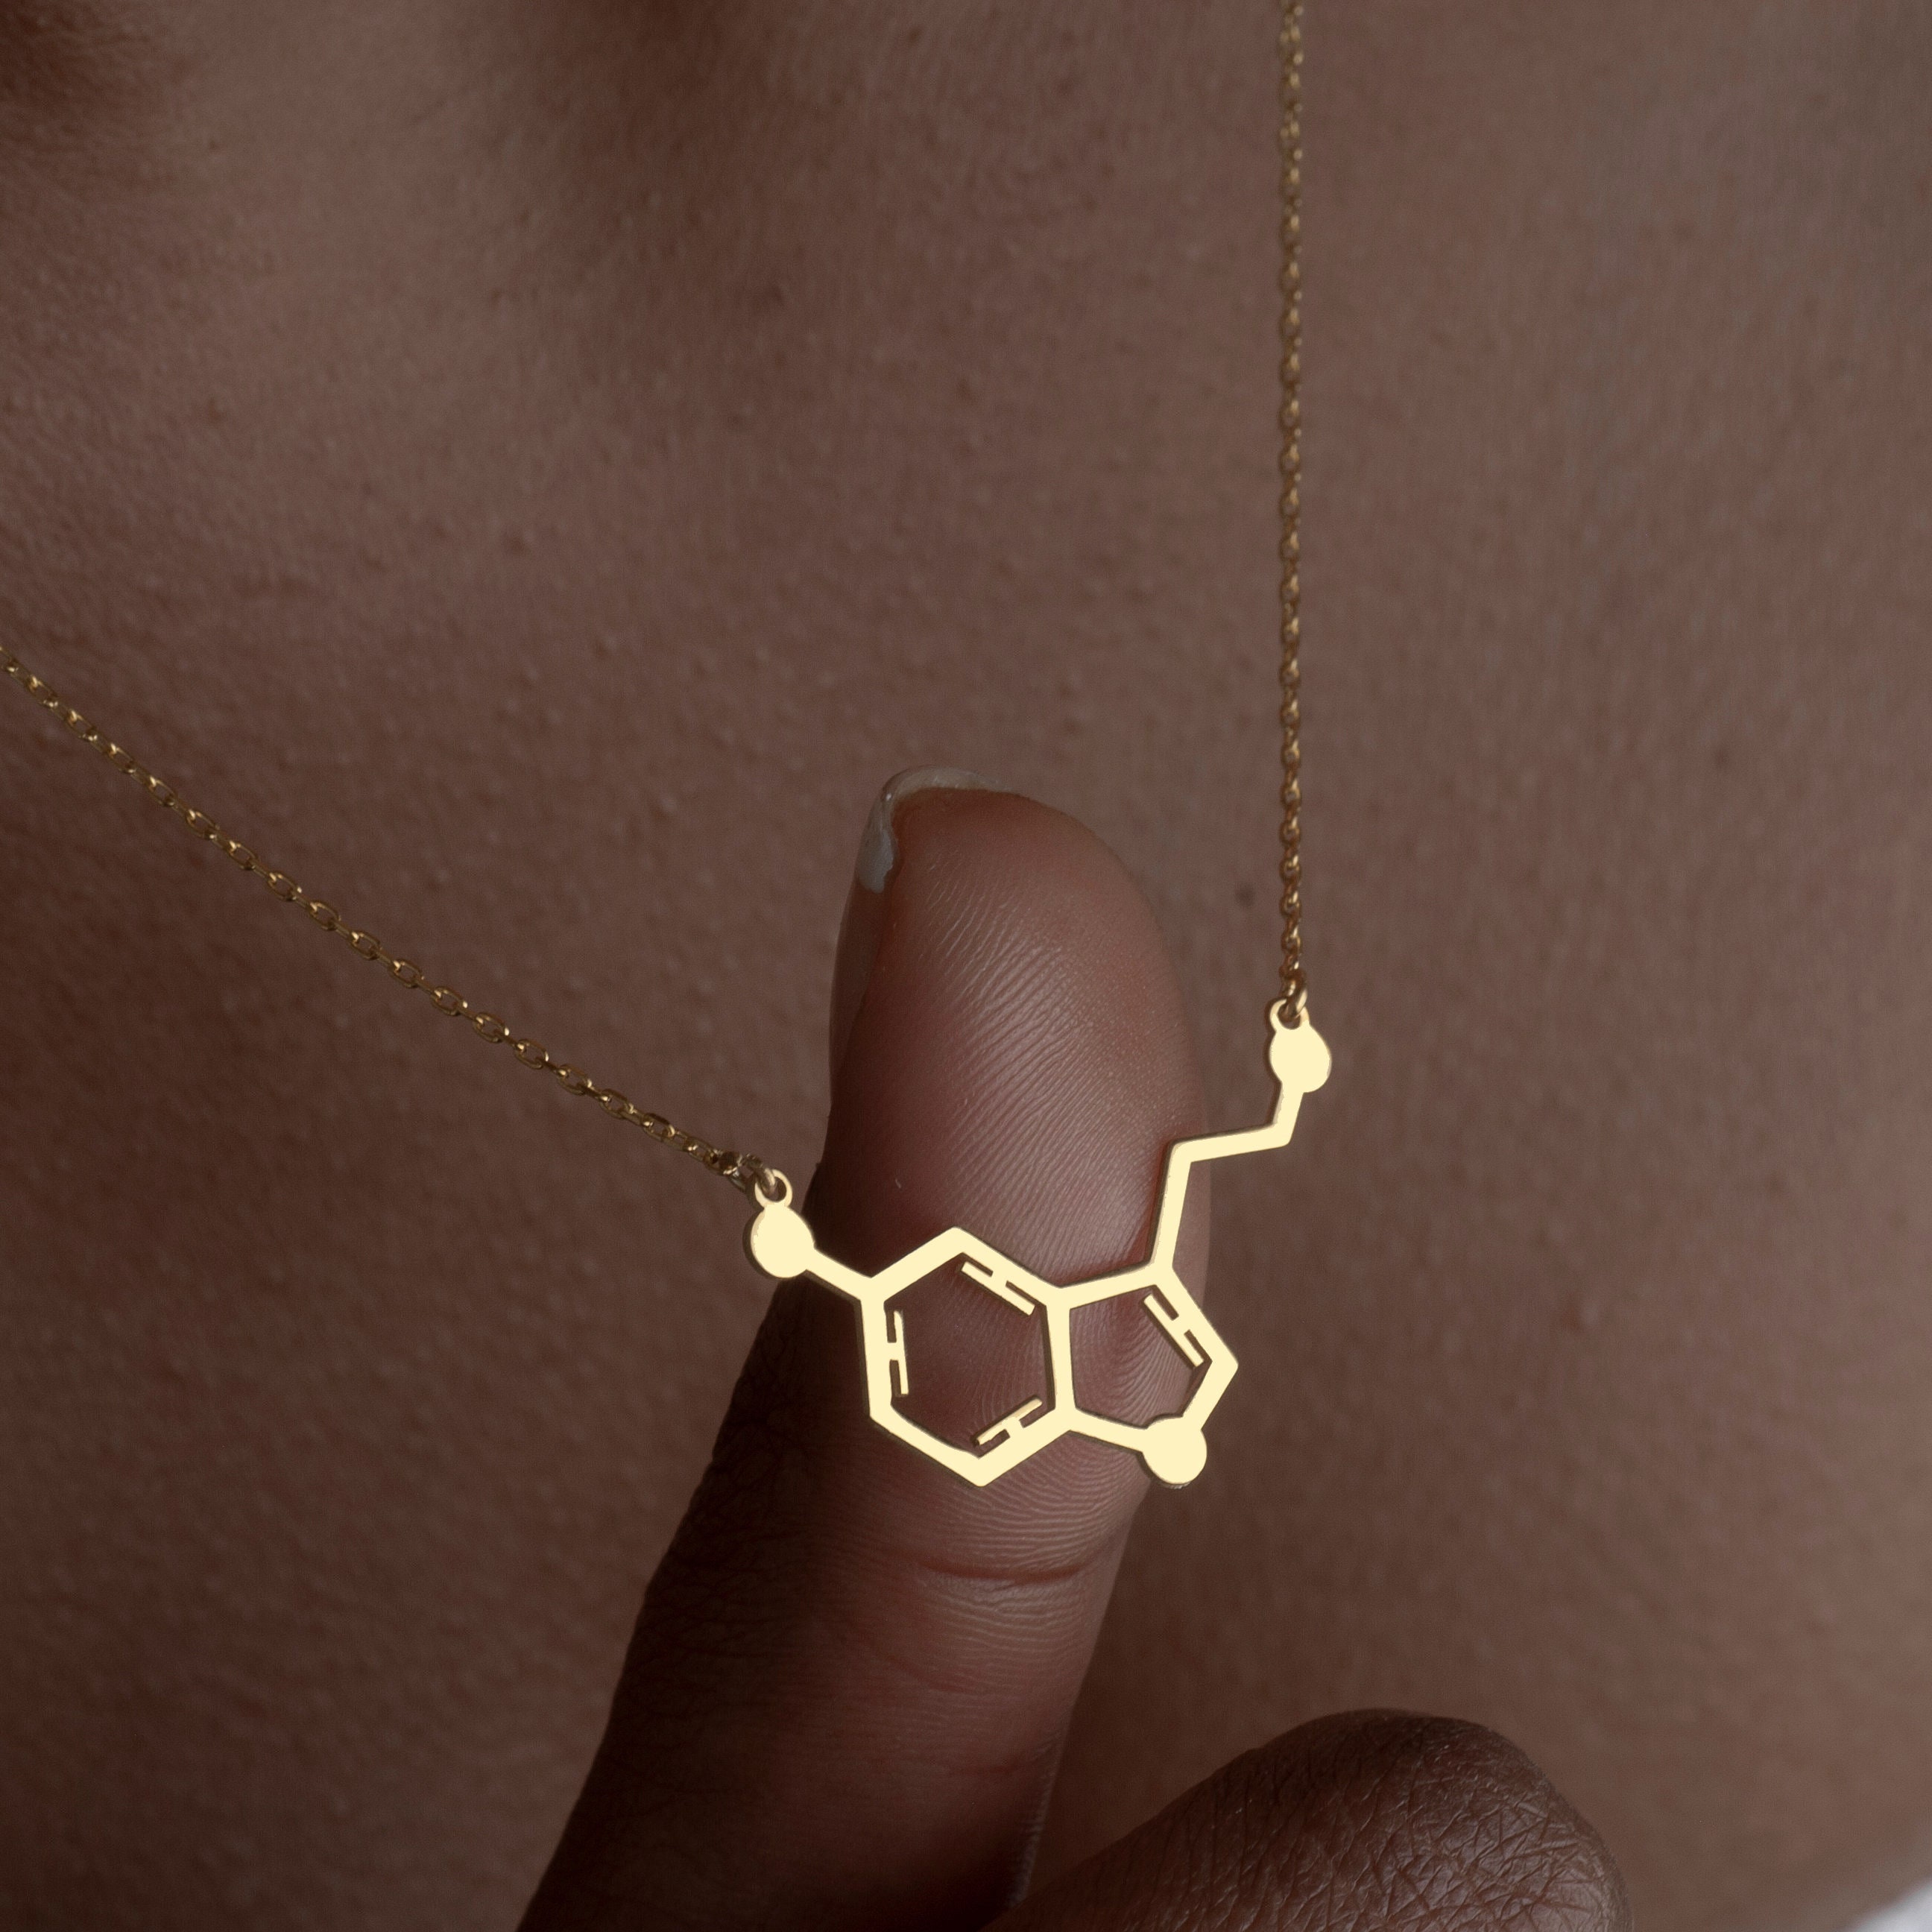 Buy Silver Serotonin Molecule Pendant Necklace,Organic Chemistry Jewelry  for Science Lovers,Gift for a Science Student (B：gold necklace) at Amazon.in